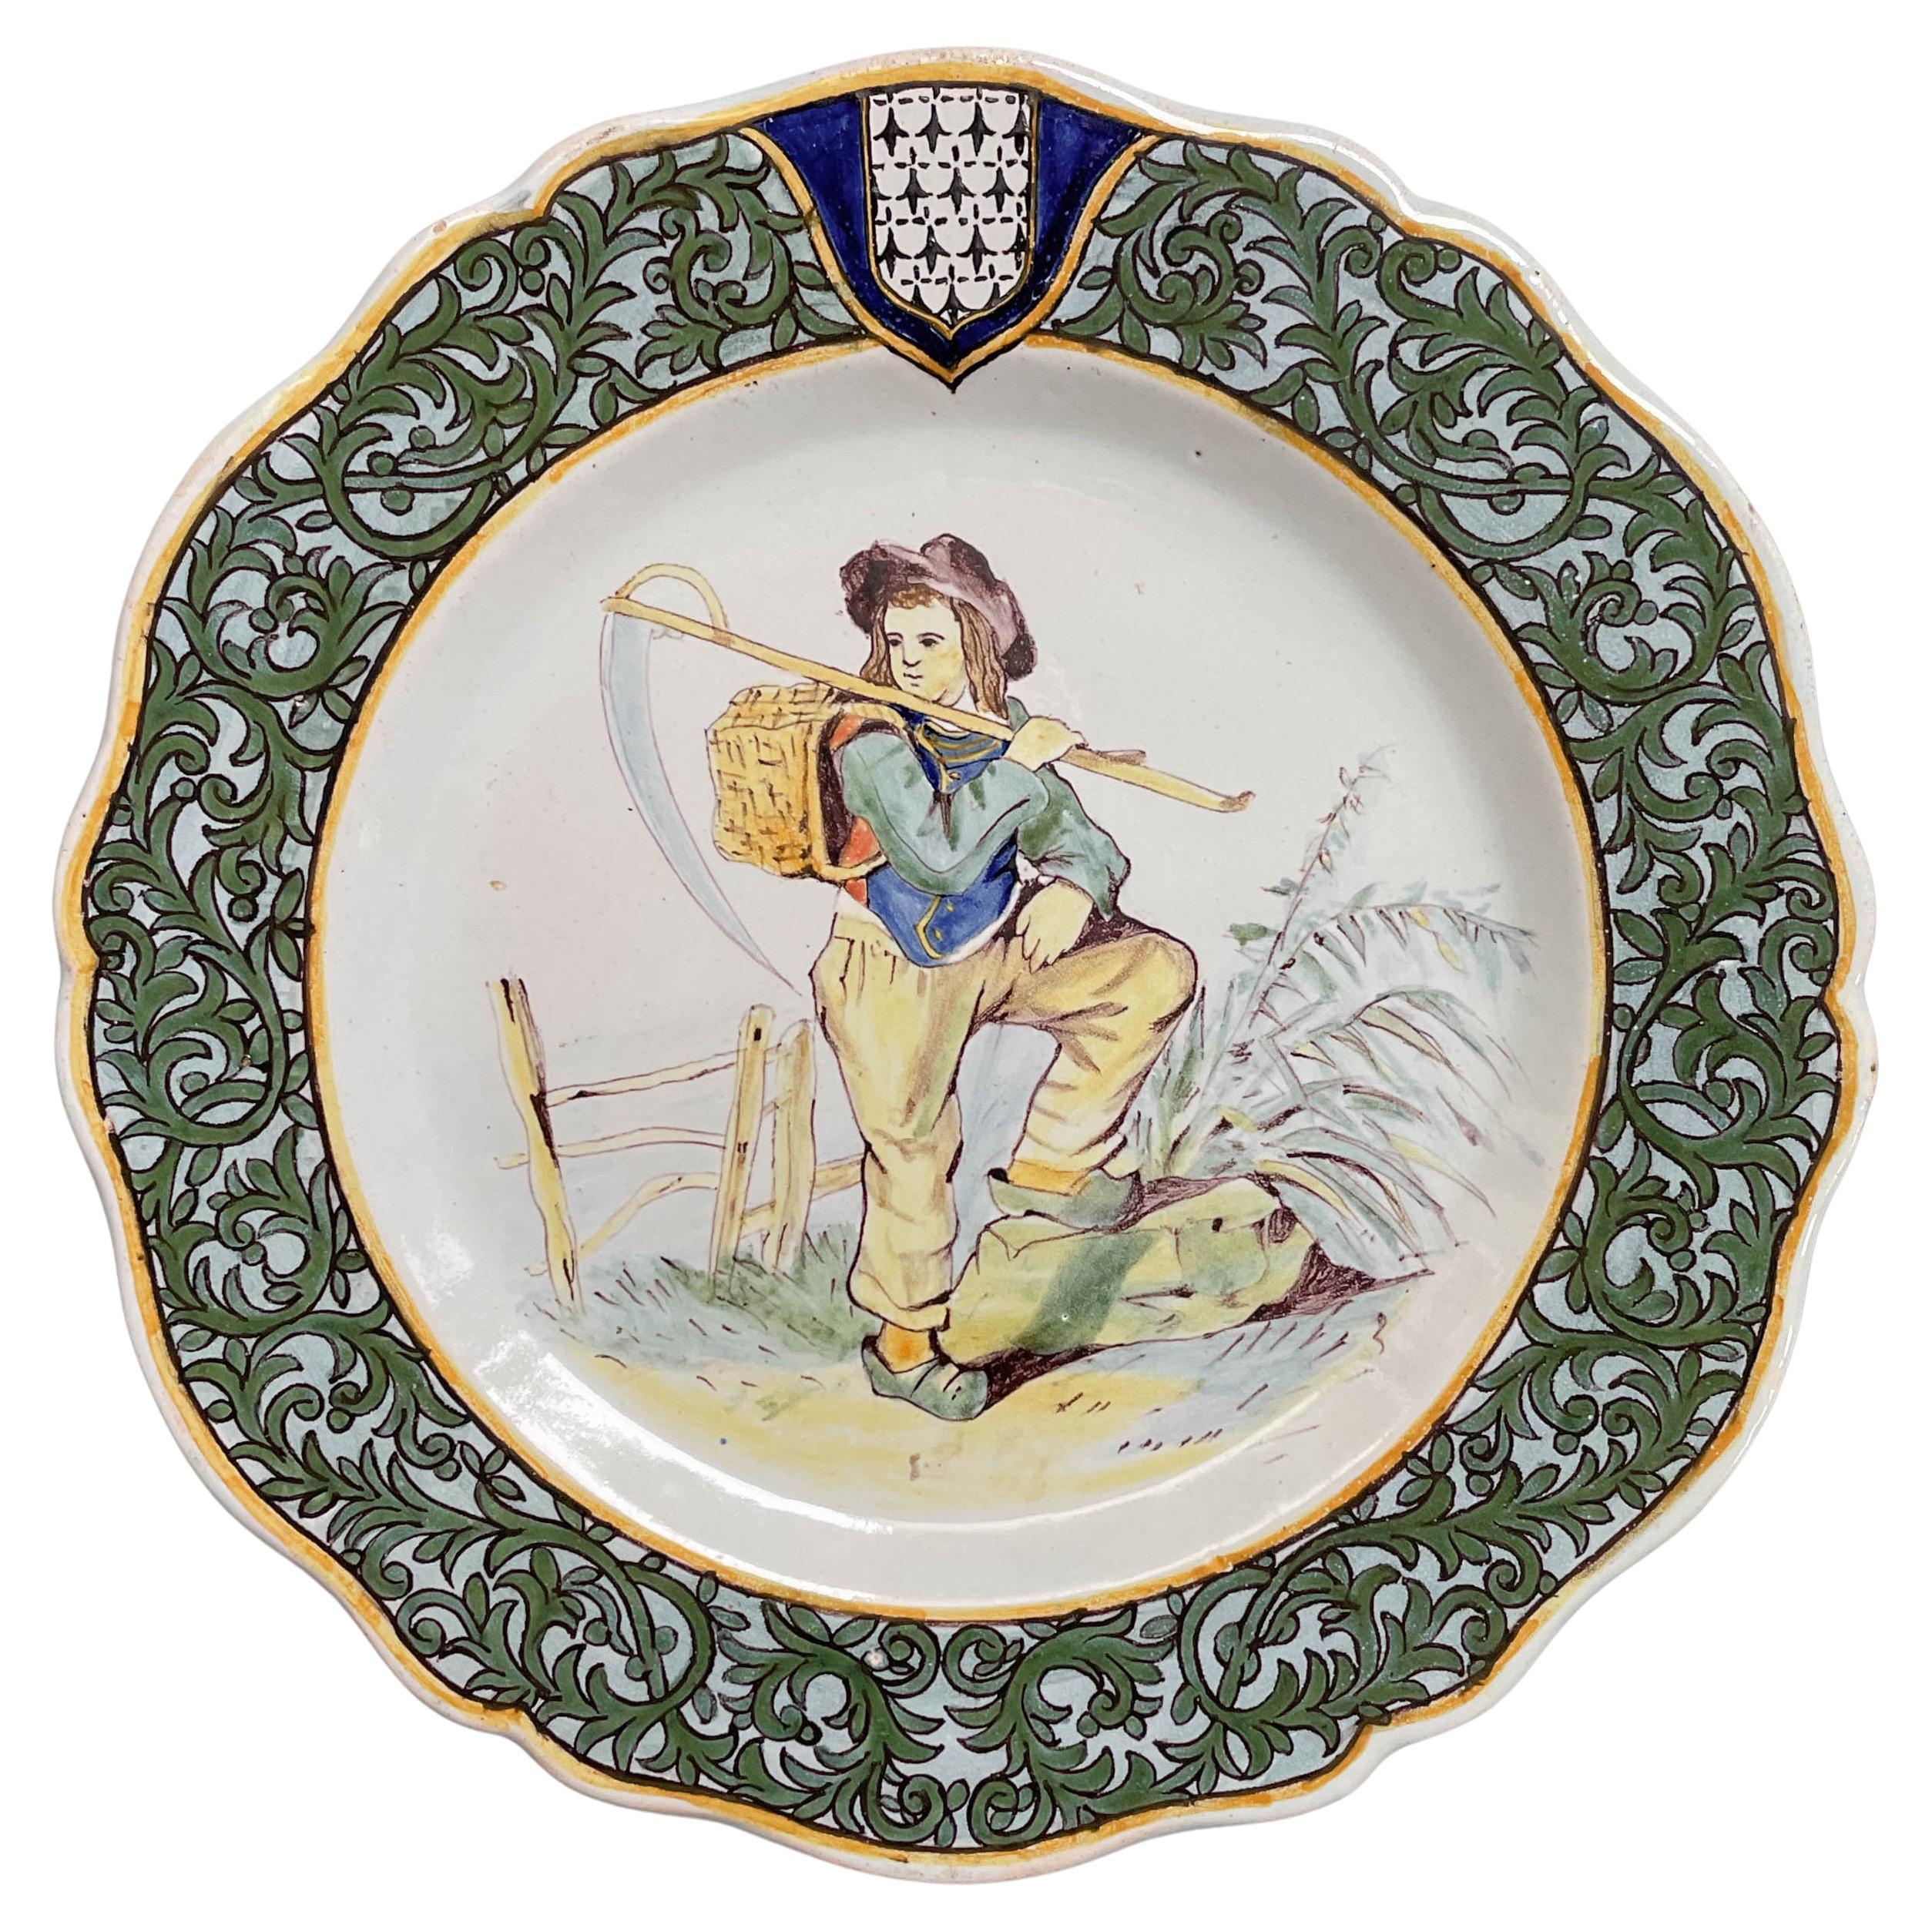 19th Century French Porquier Beau Quimper Faience Plate